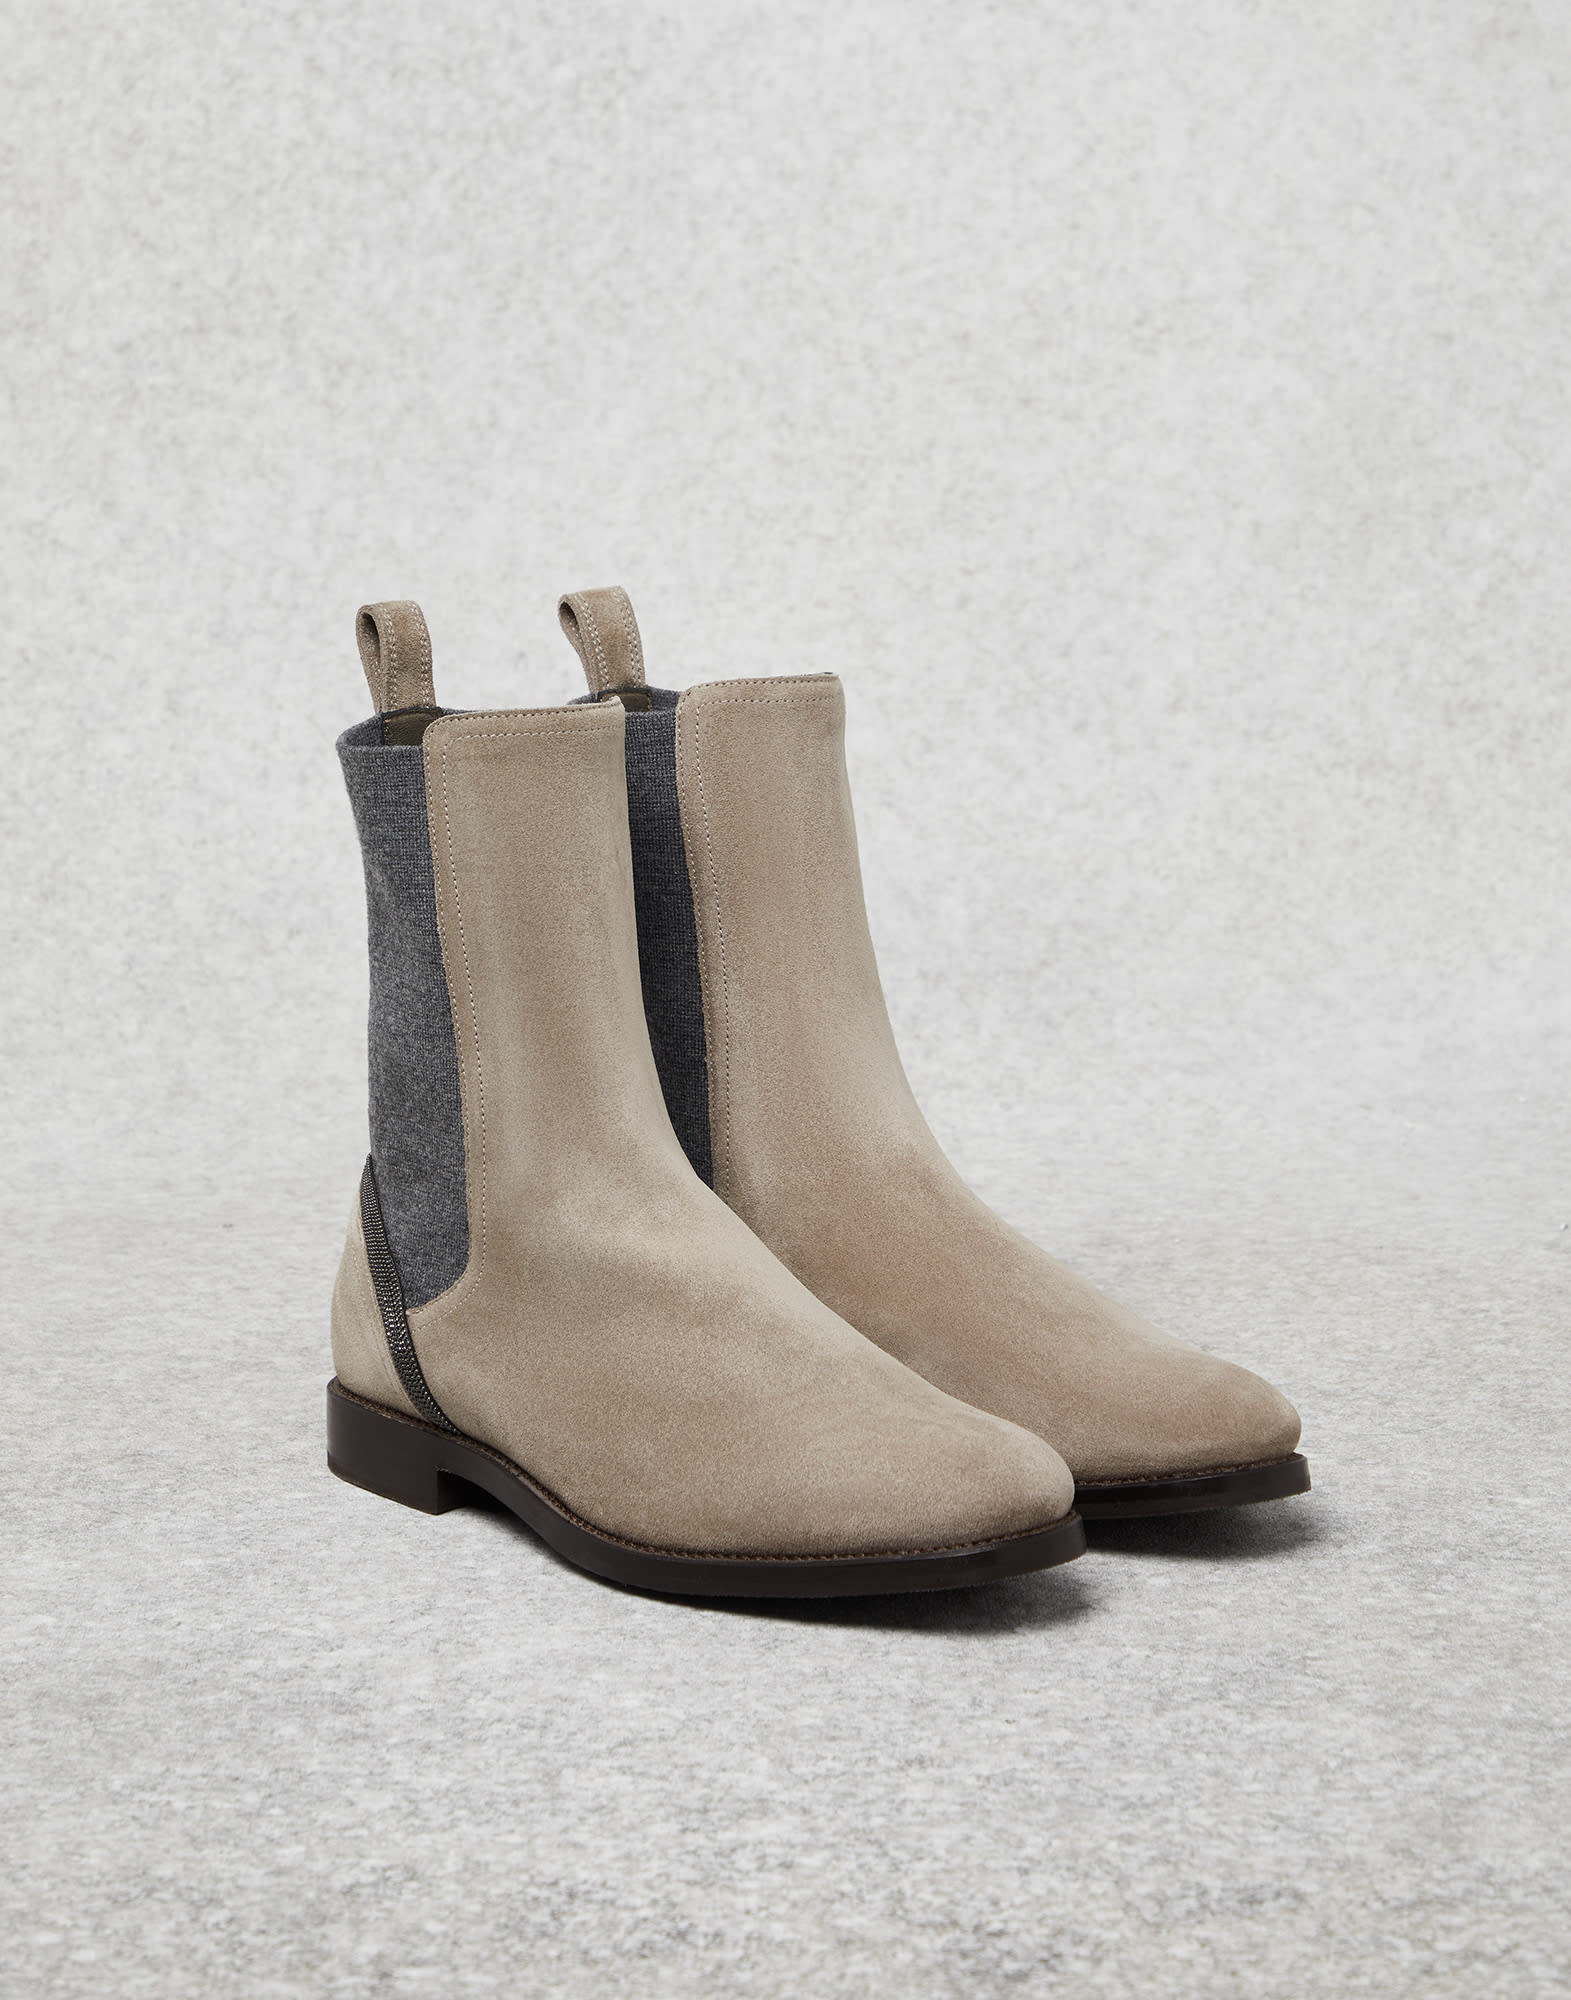 Suede Chelsea boots